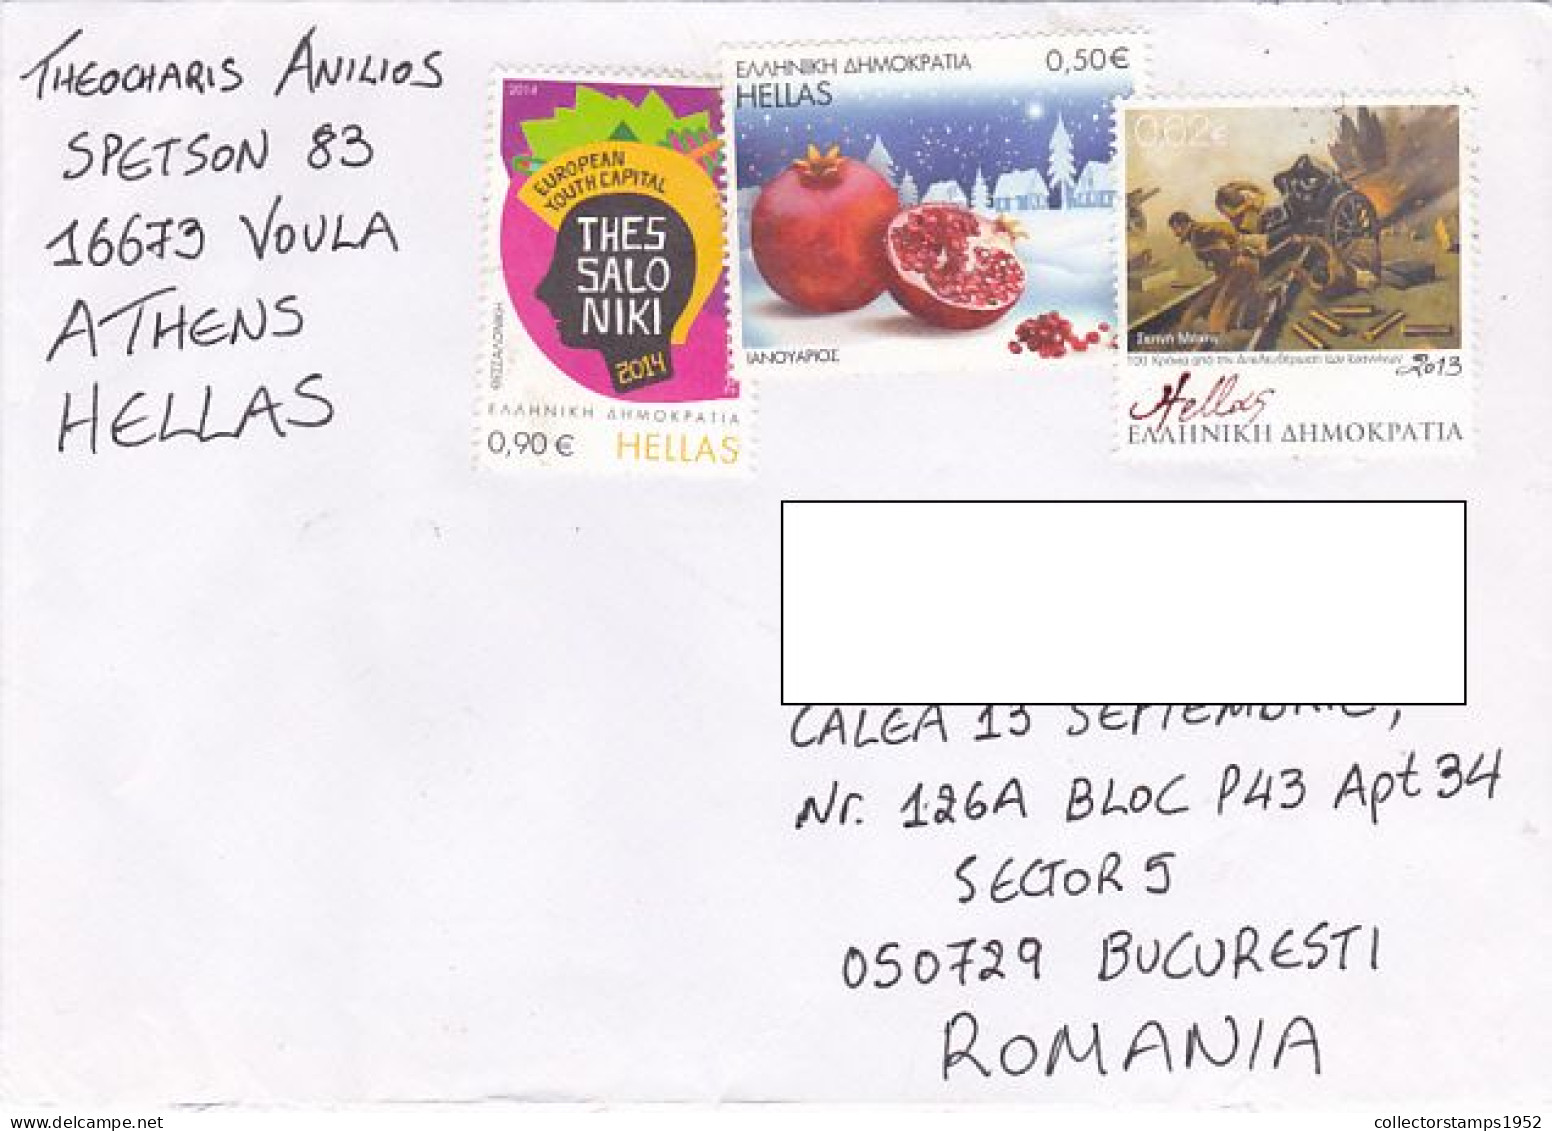 EUROPEAN YOUTH CAPITAL, POMEGRANATE, IOANNINA LIBERATION, STAMPS ON COVER, 2022, GREECE - Briefe U. Dokumente